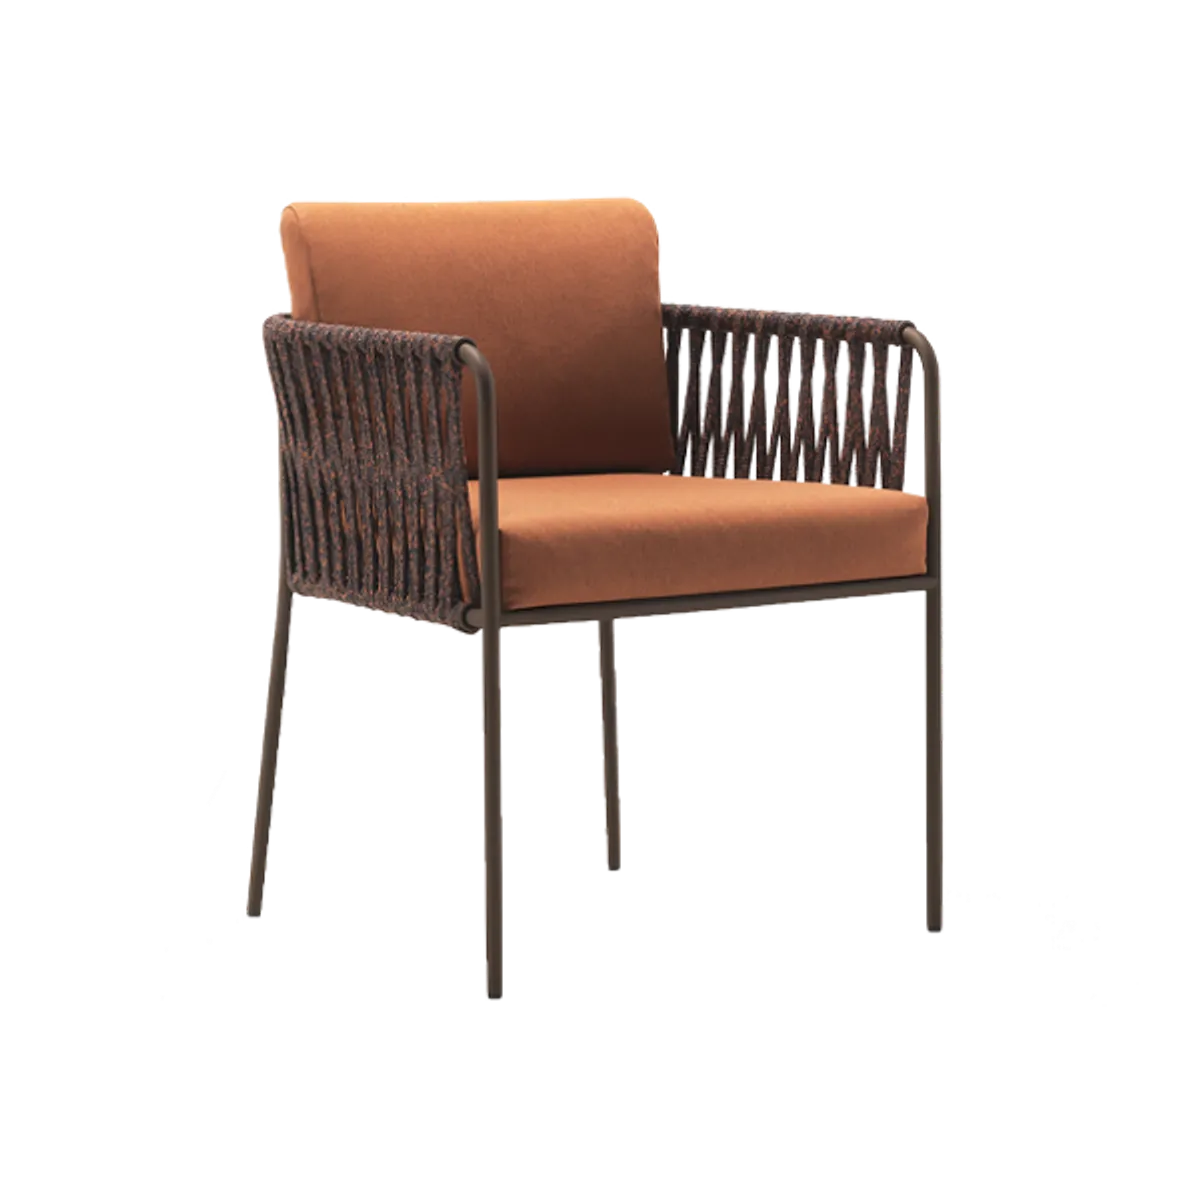 Hitch Armchair Woven Outdoor Furniture Inside Out Contracts